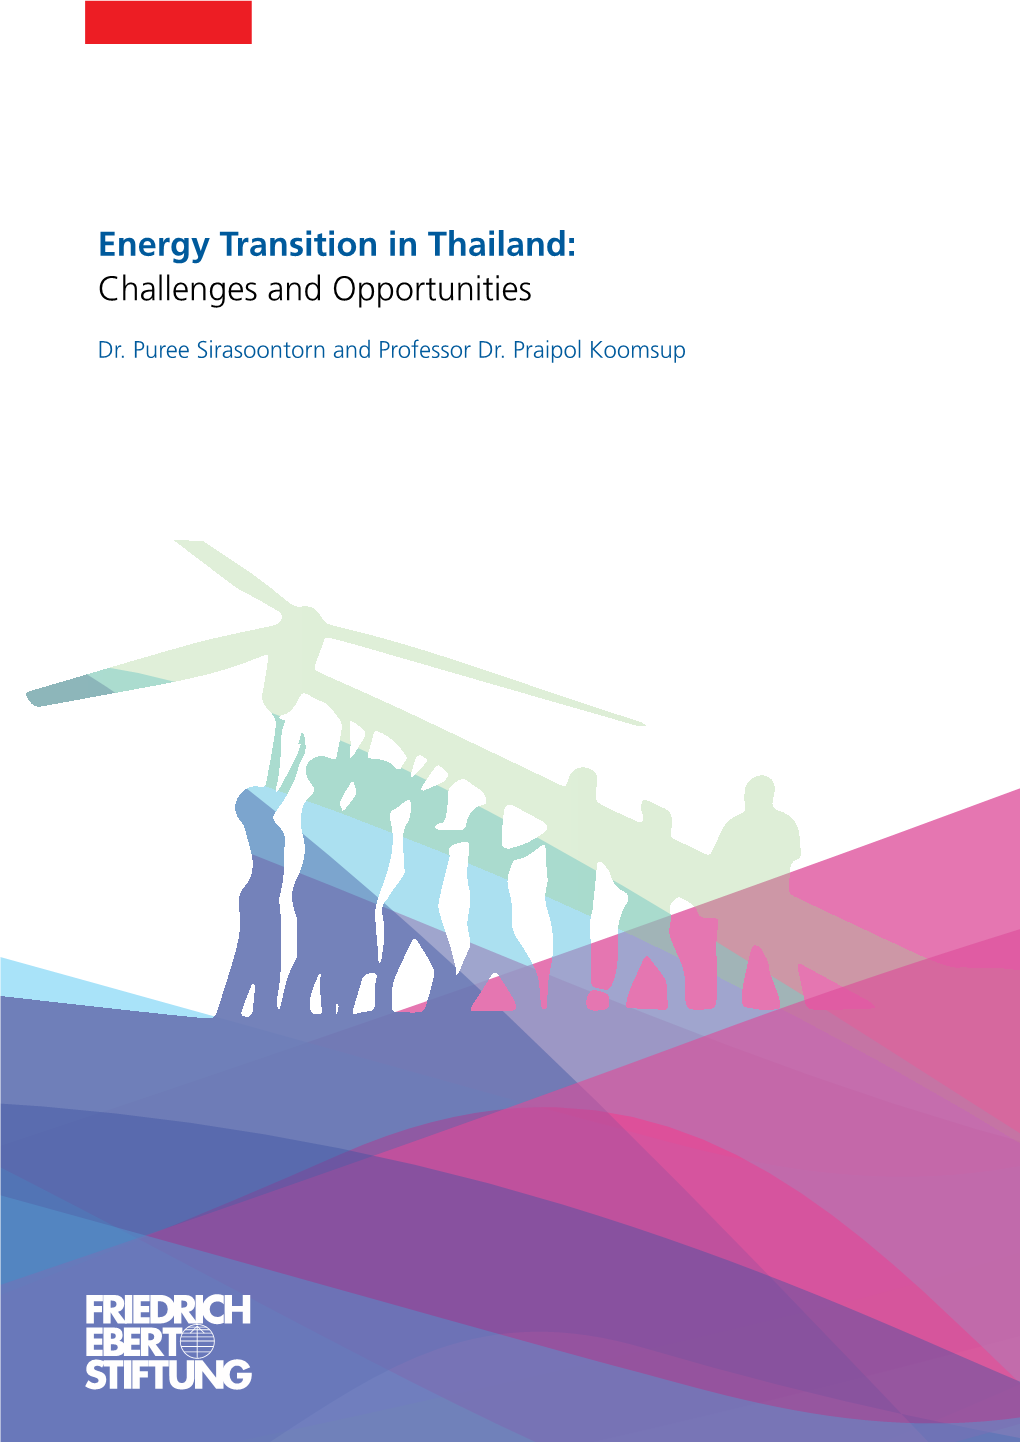 Energy Transition in Thailand: Challenges and Opportunities